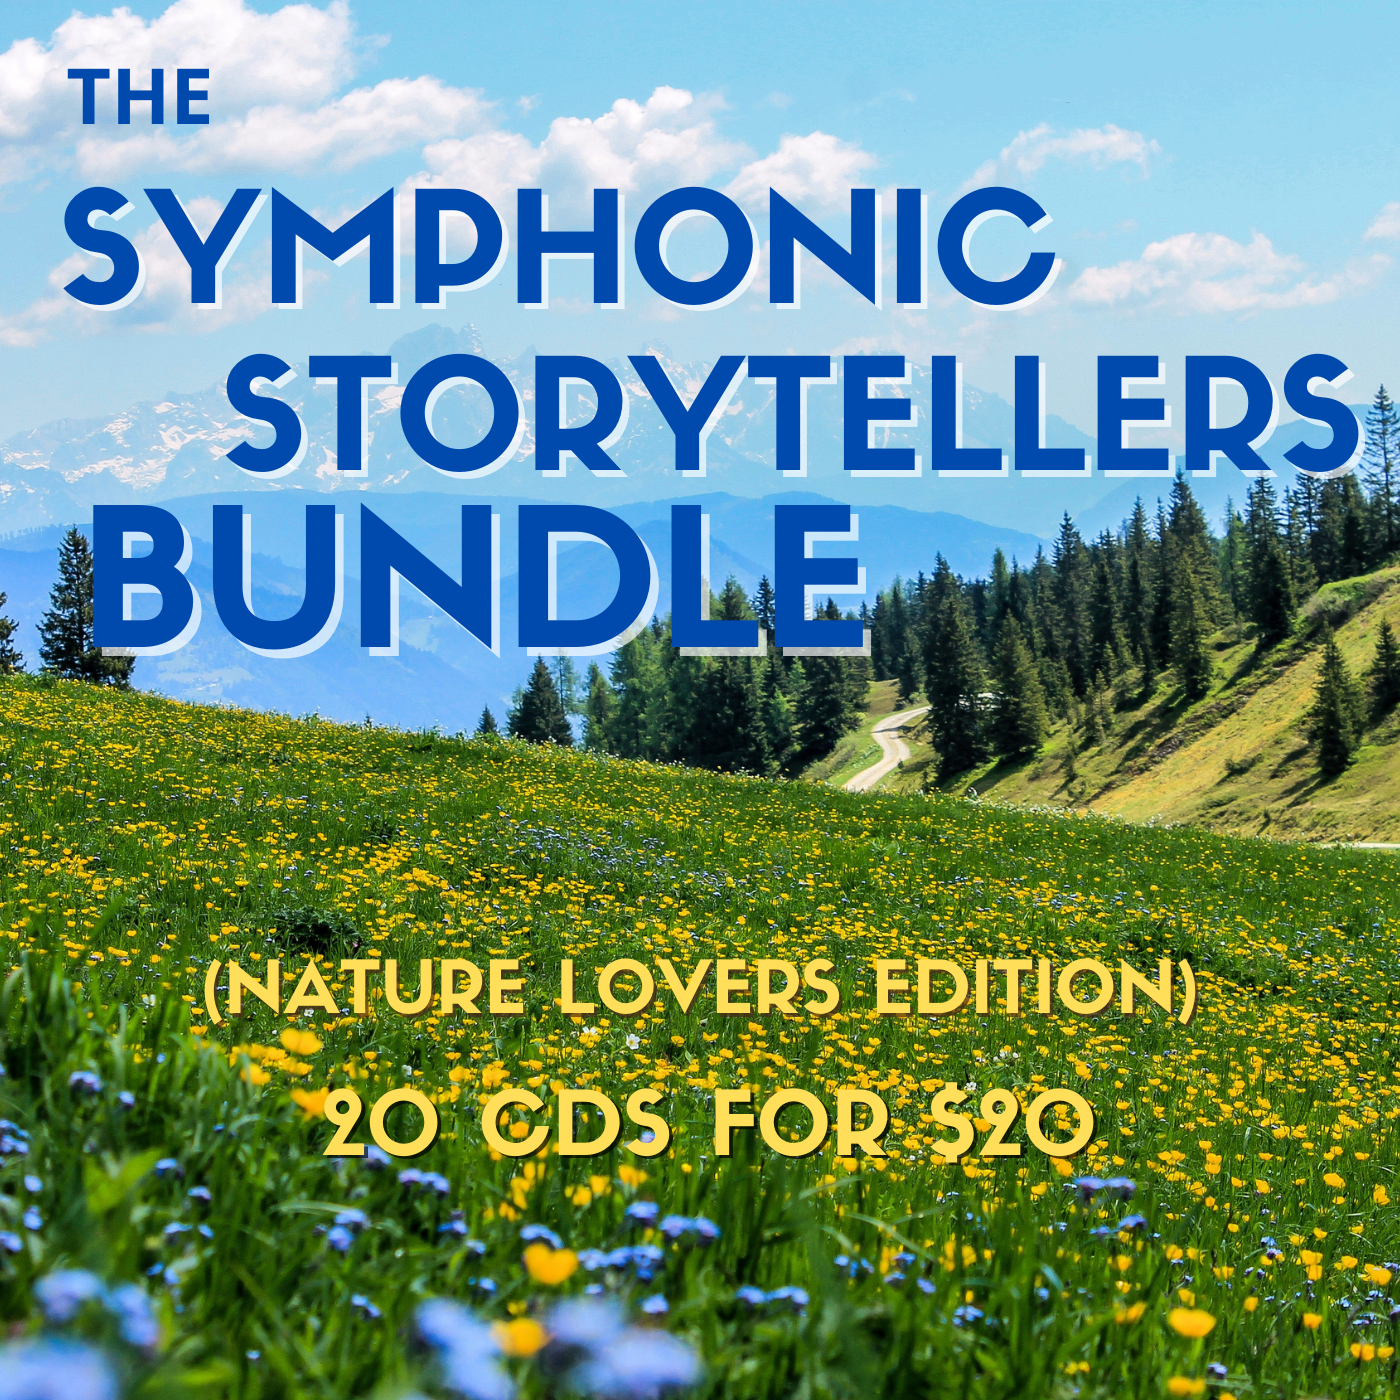 THE SYMPHONIC STORYTELLERS BUNDLE (NATURE LOVERS EDITION)